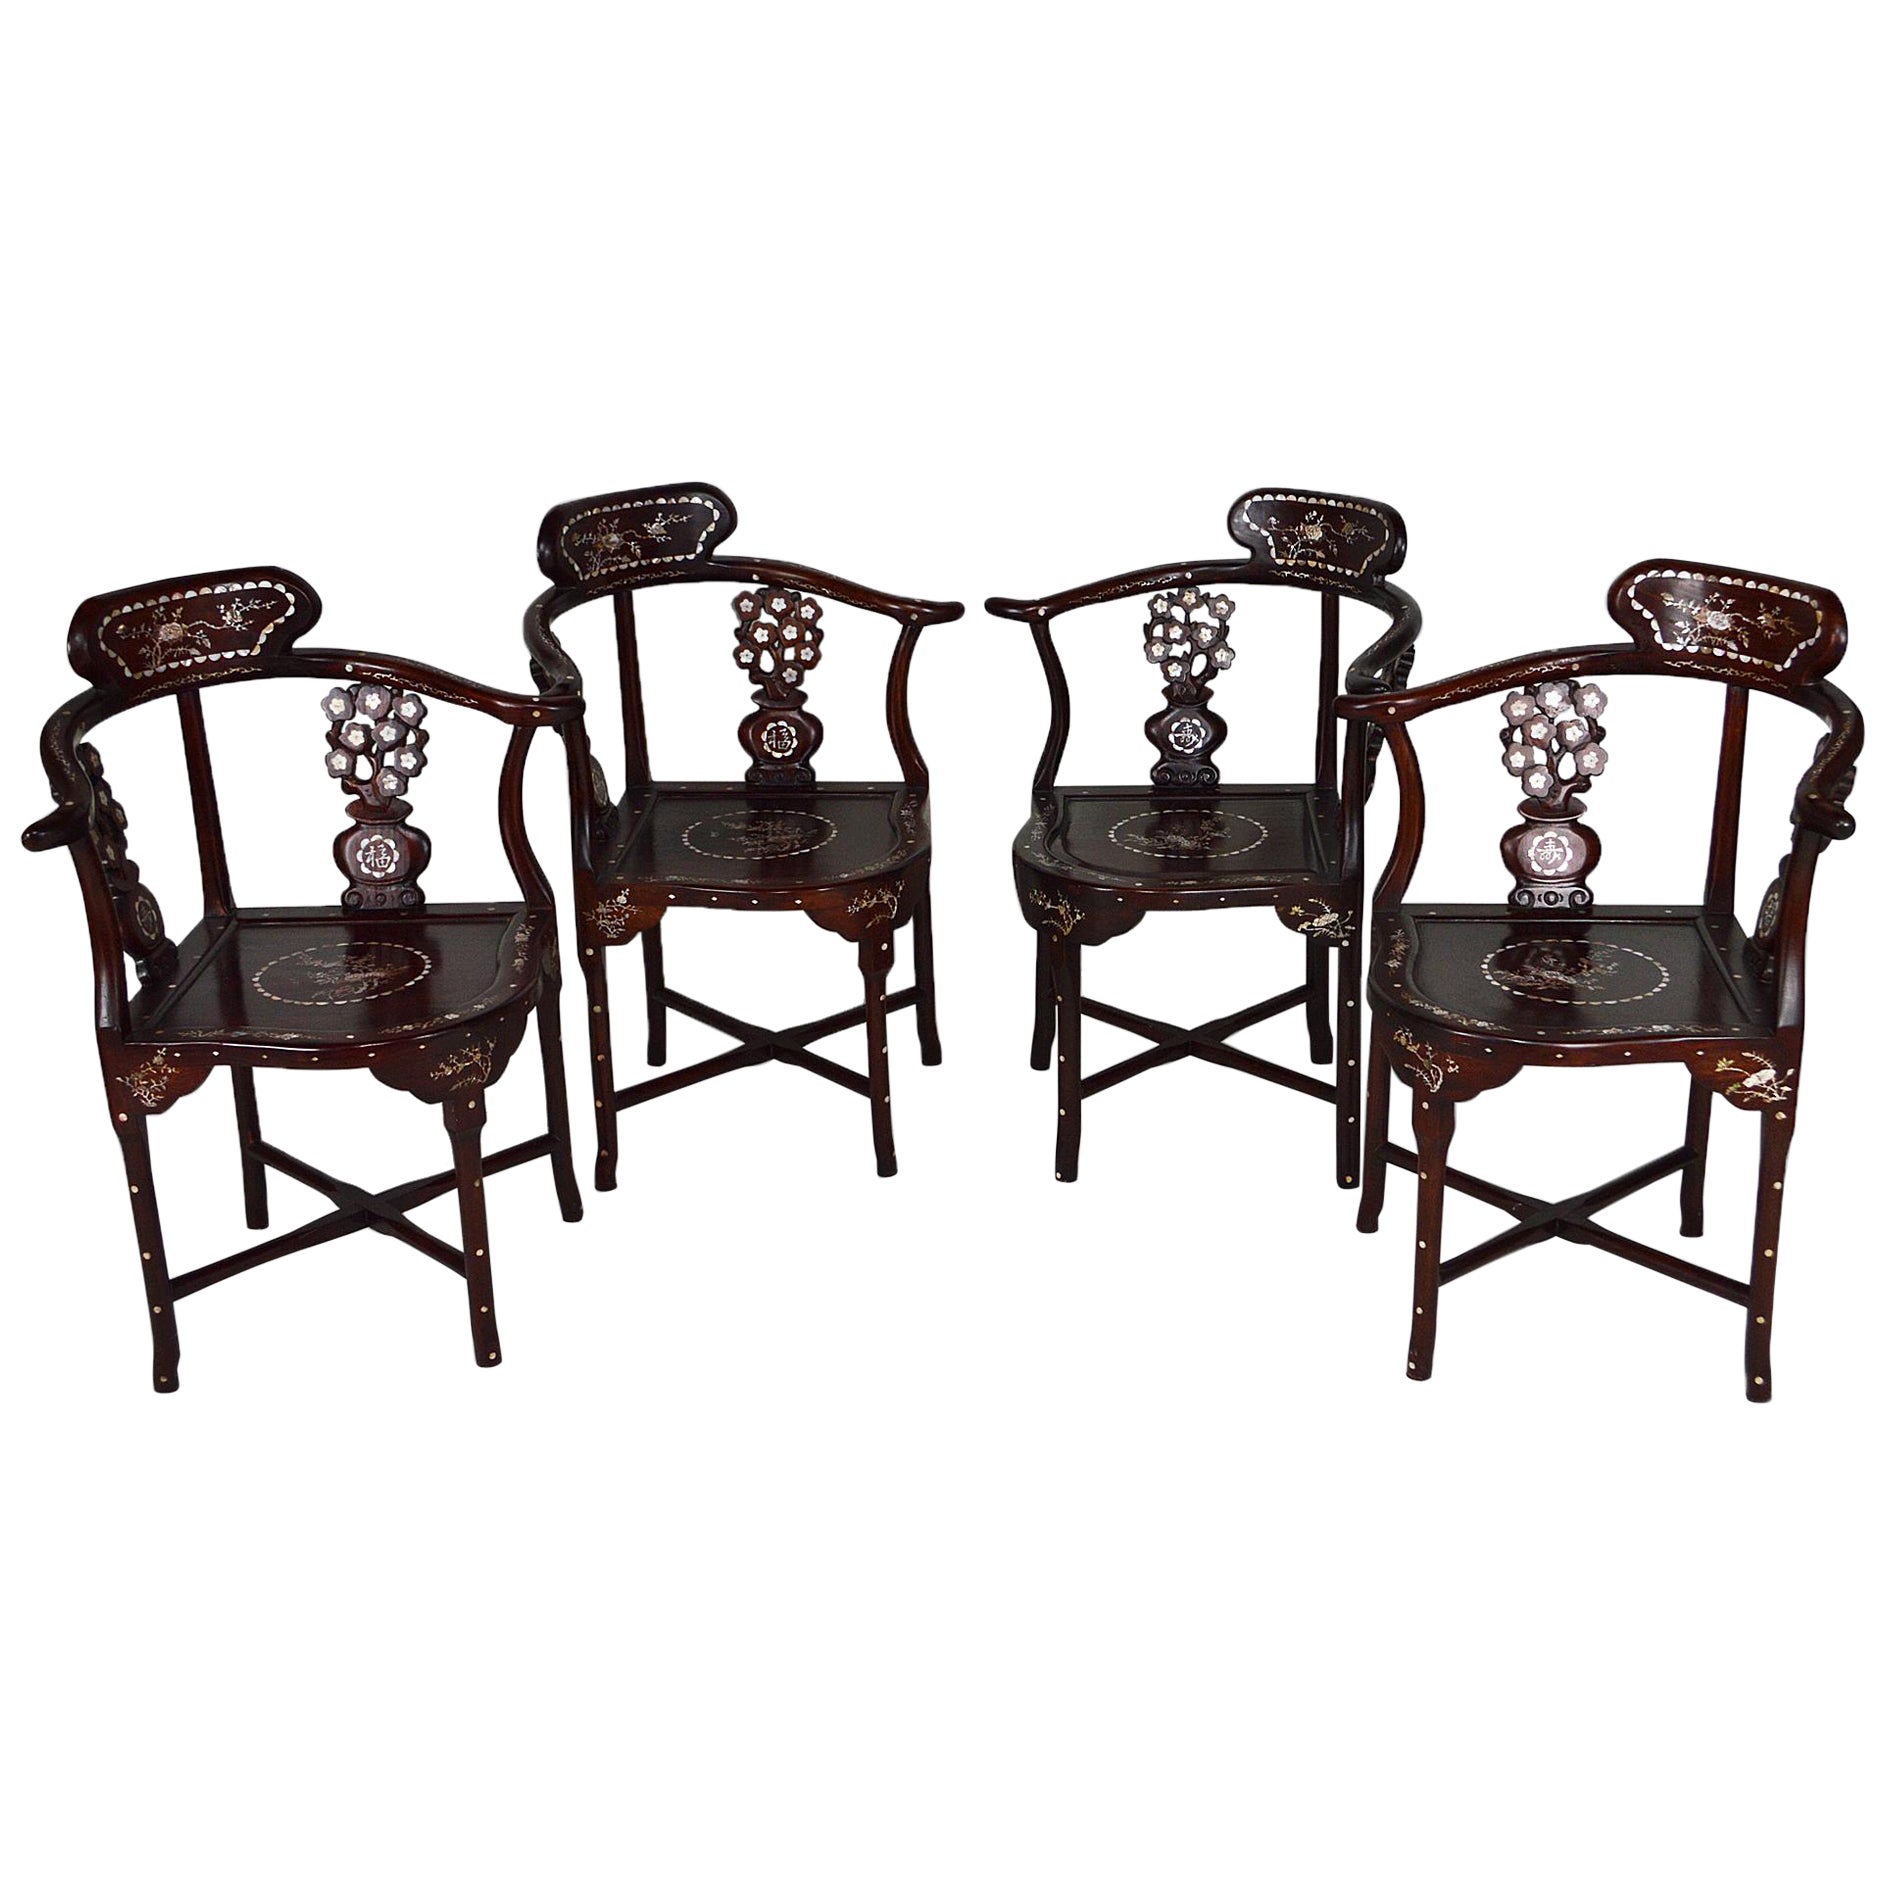 Set of 4 Asian Armchairs in Carved and Inlaid Wood, circa 1900-1920 For Sale